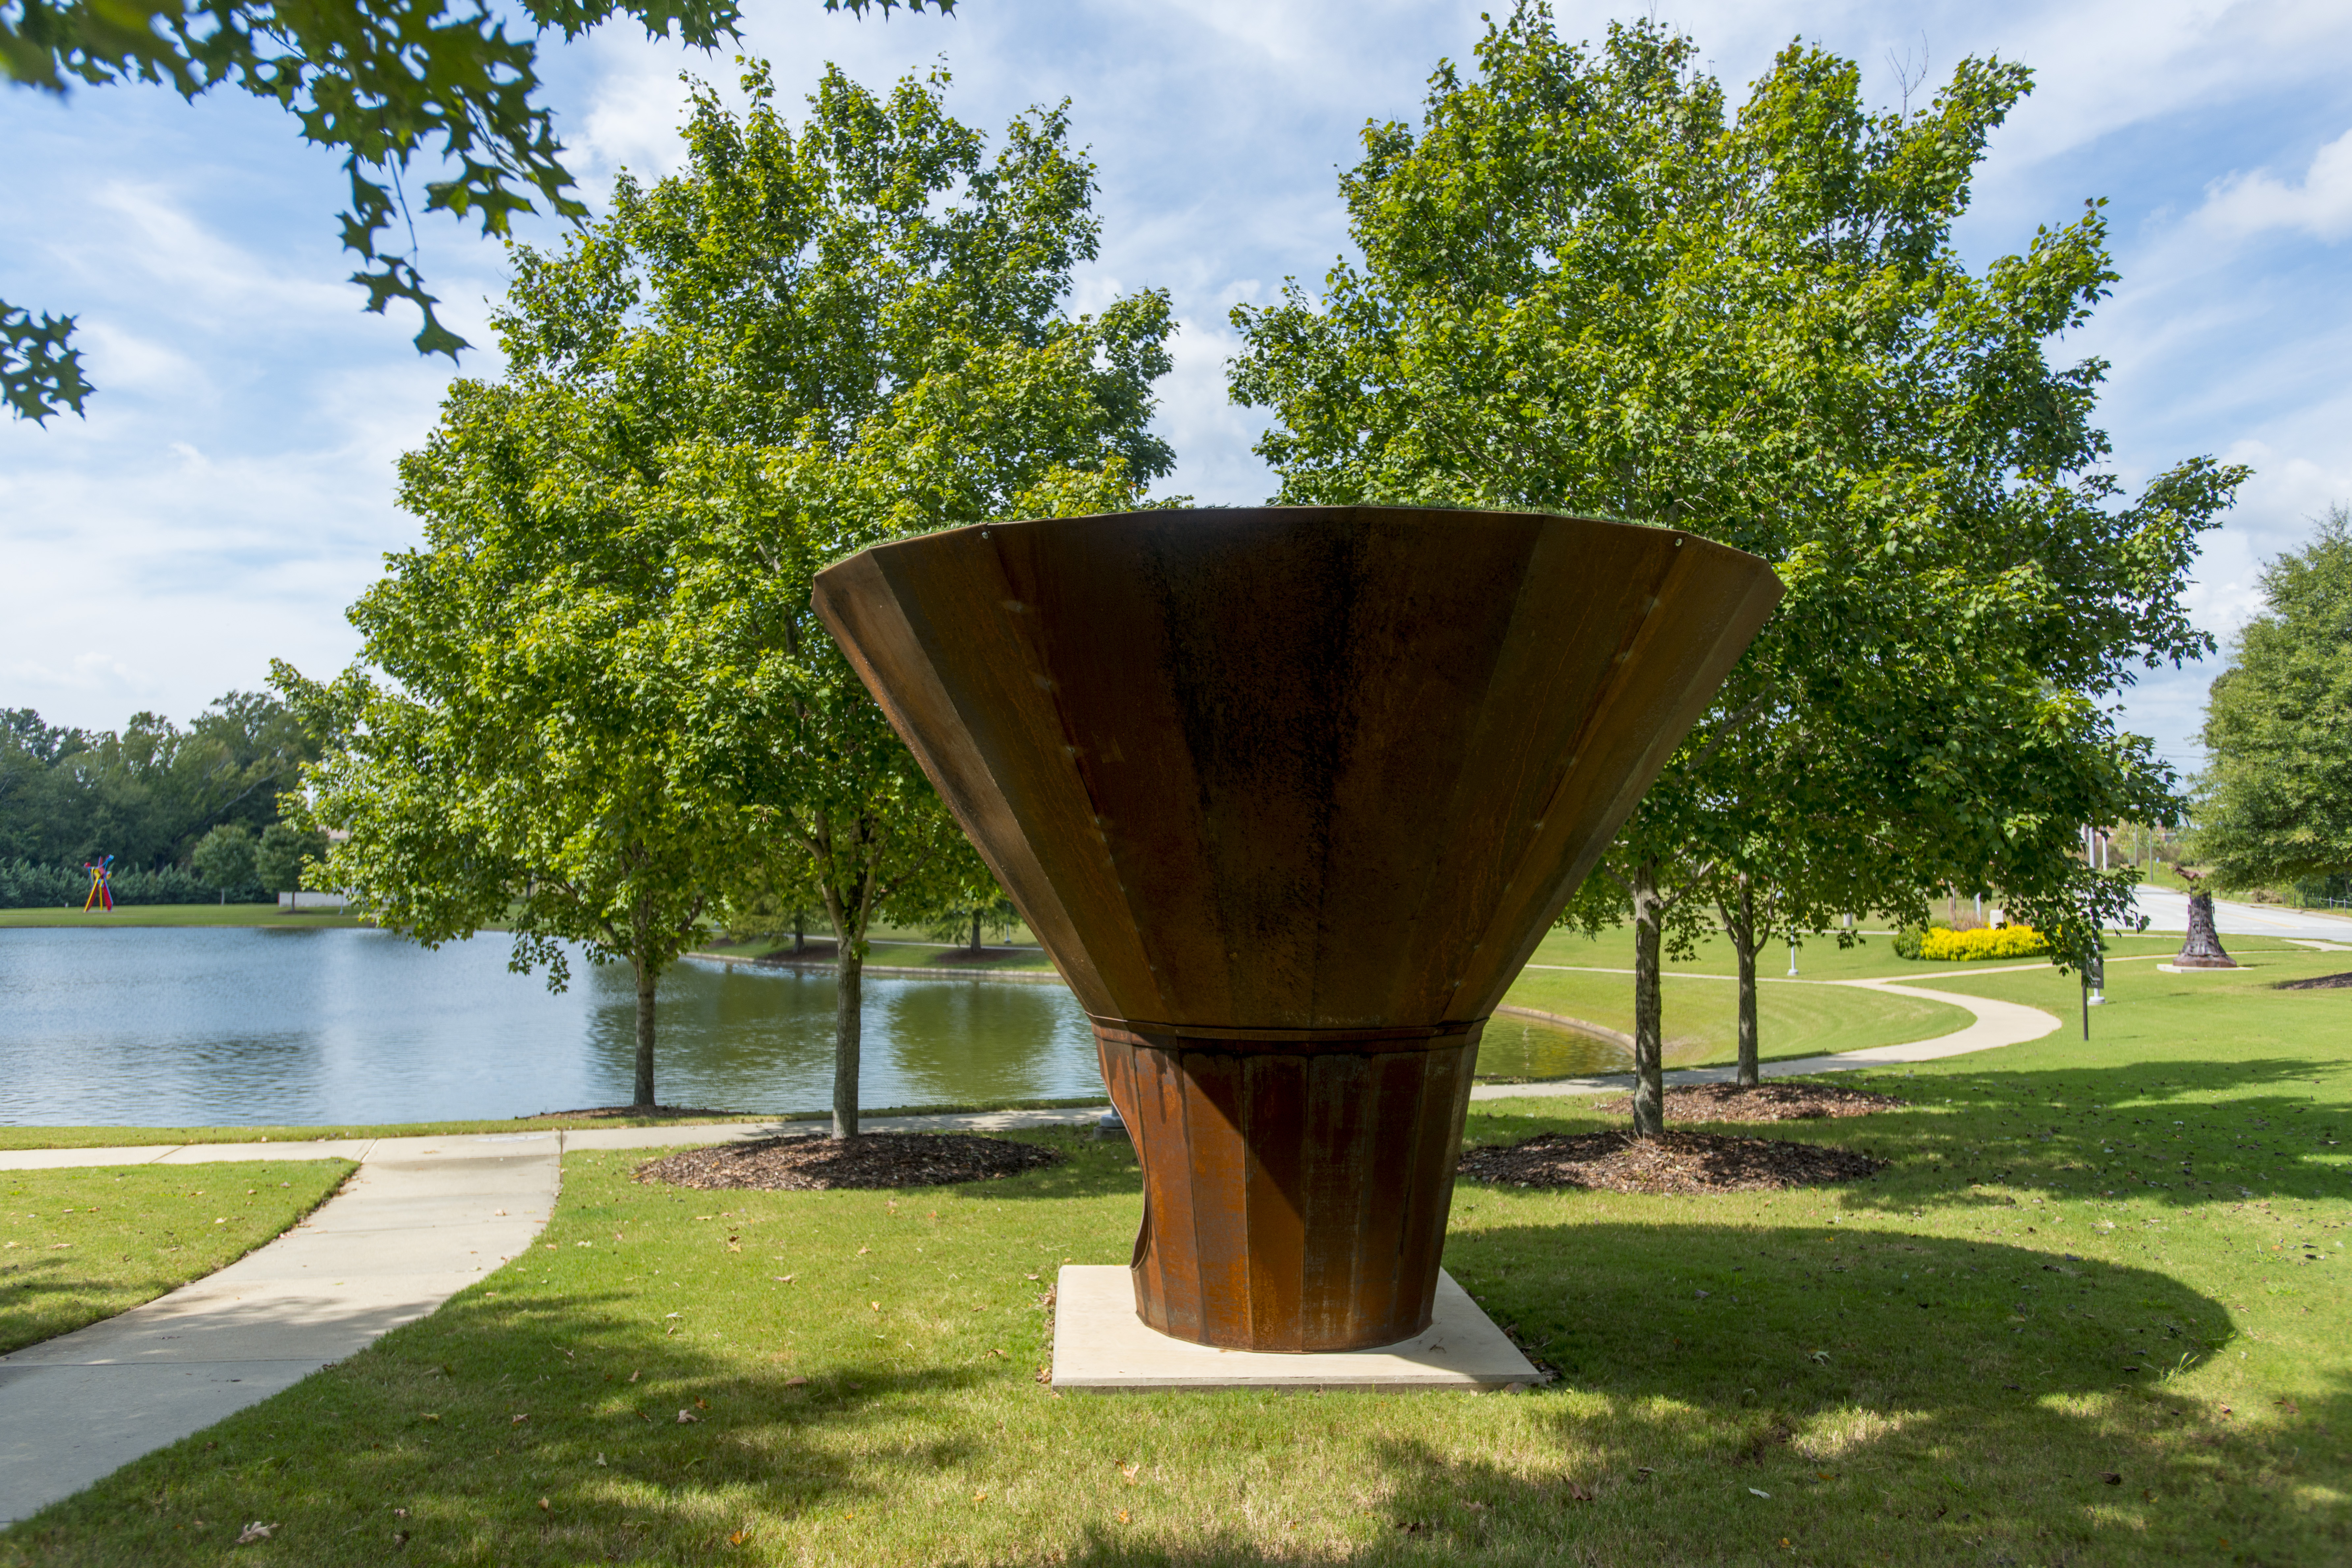 A steel scuplture in the shape of a cone, with a small opening at the base